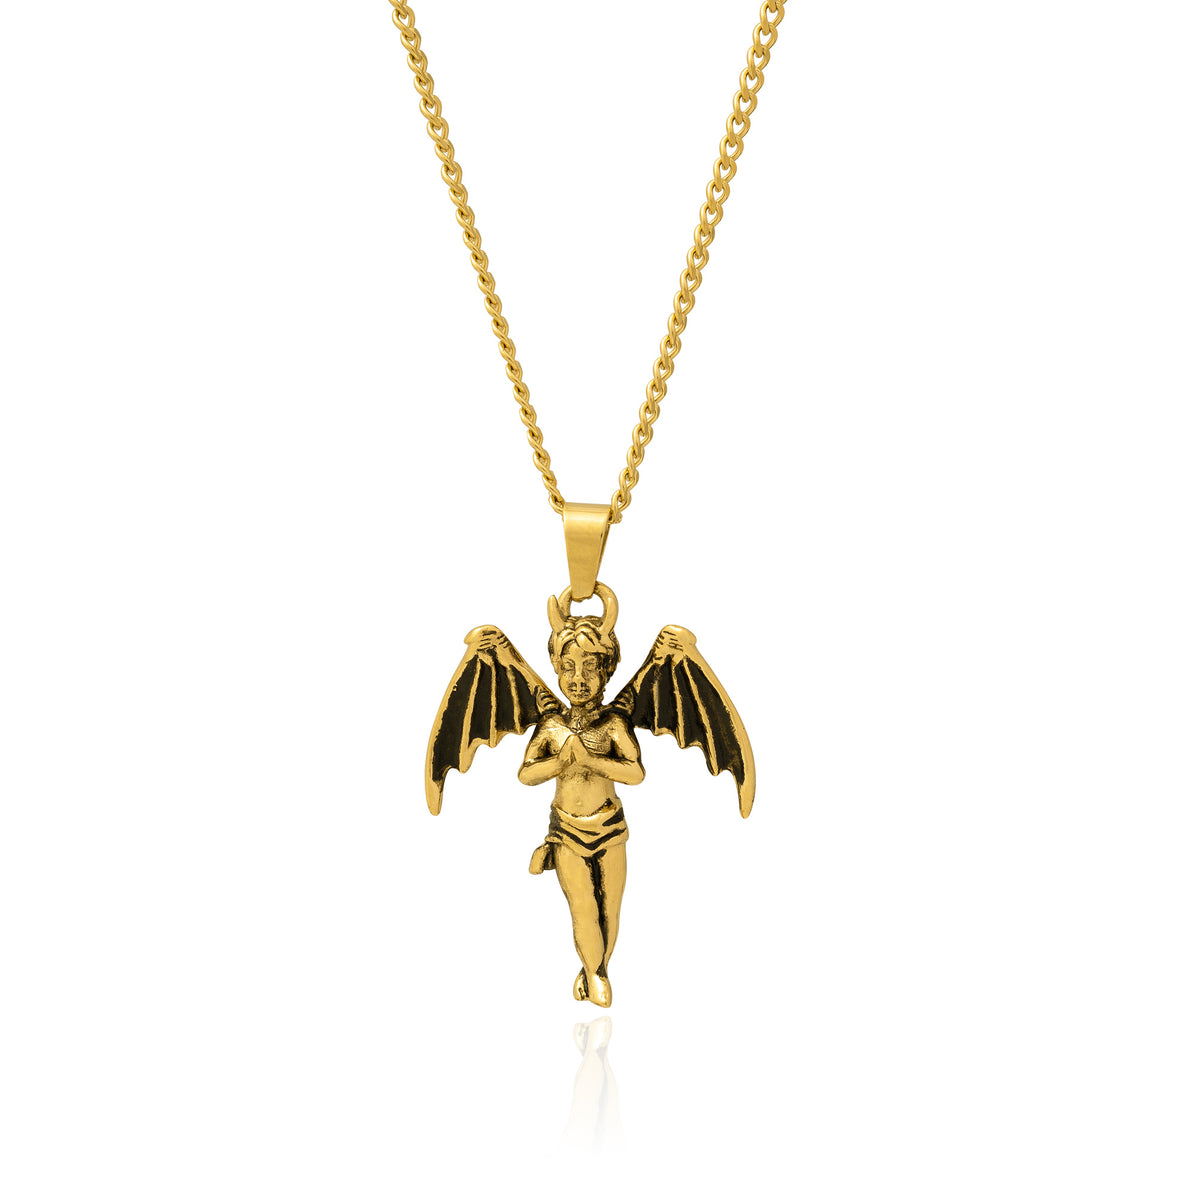 Unisex gold demon necklace with chain